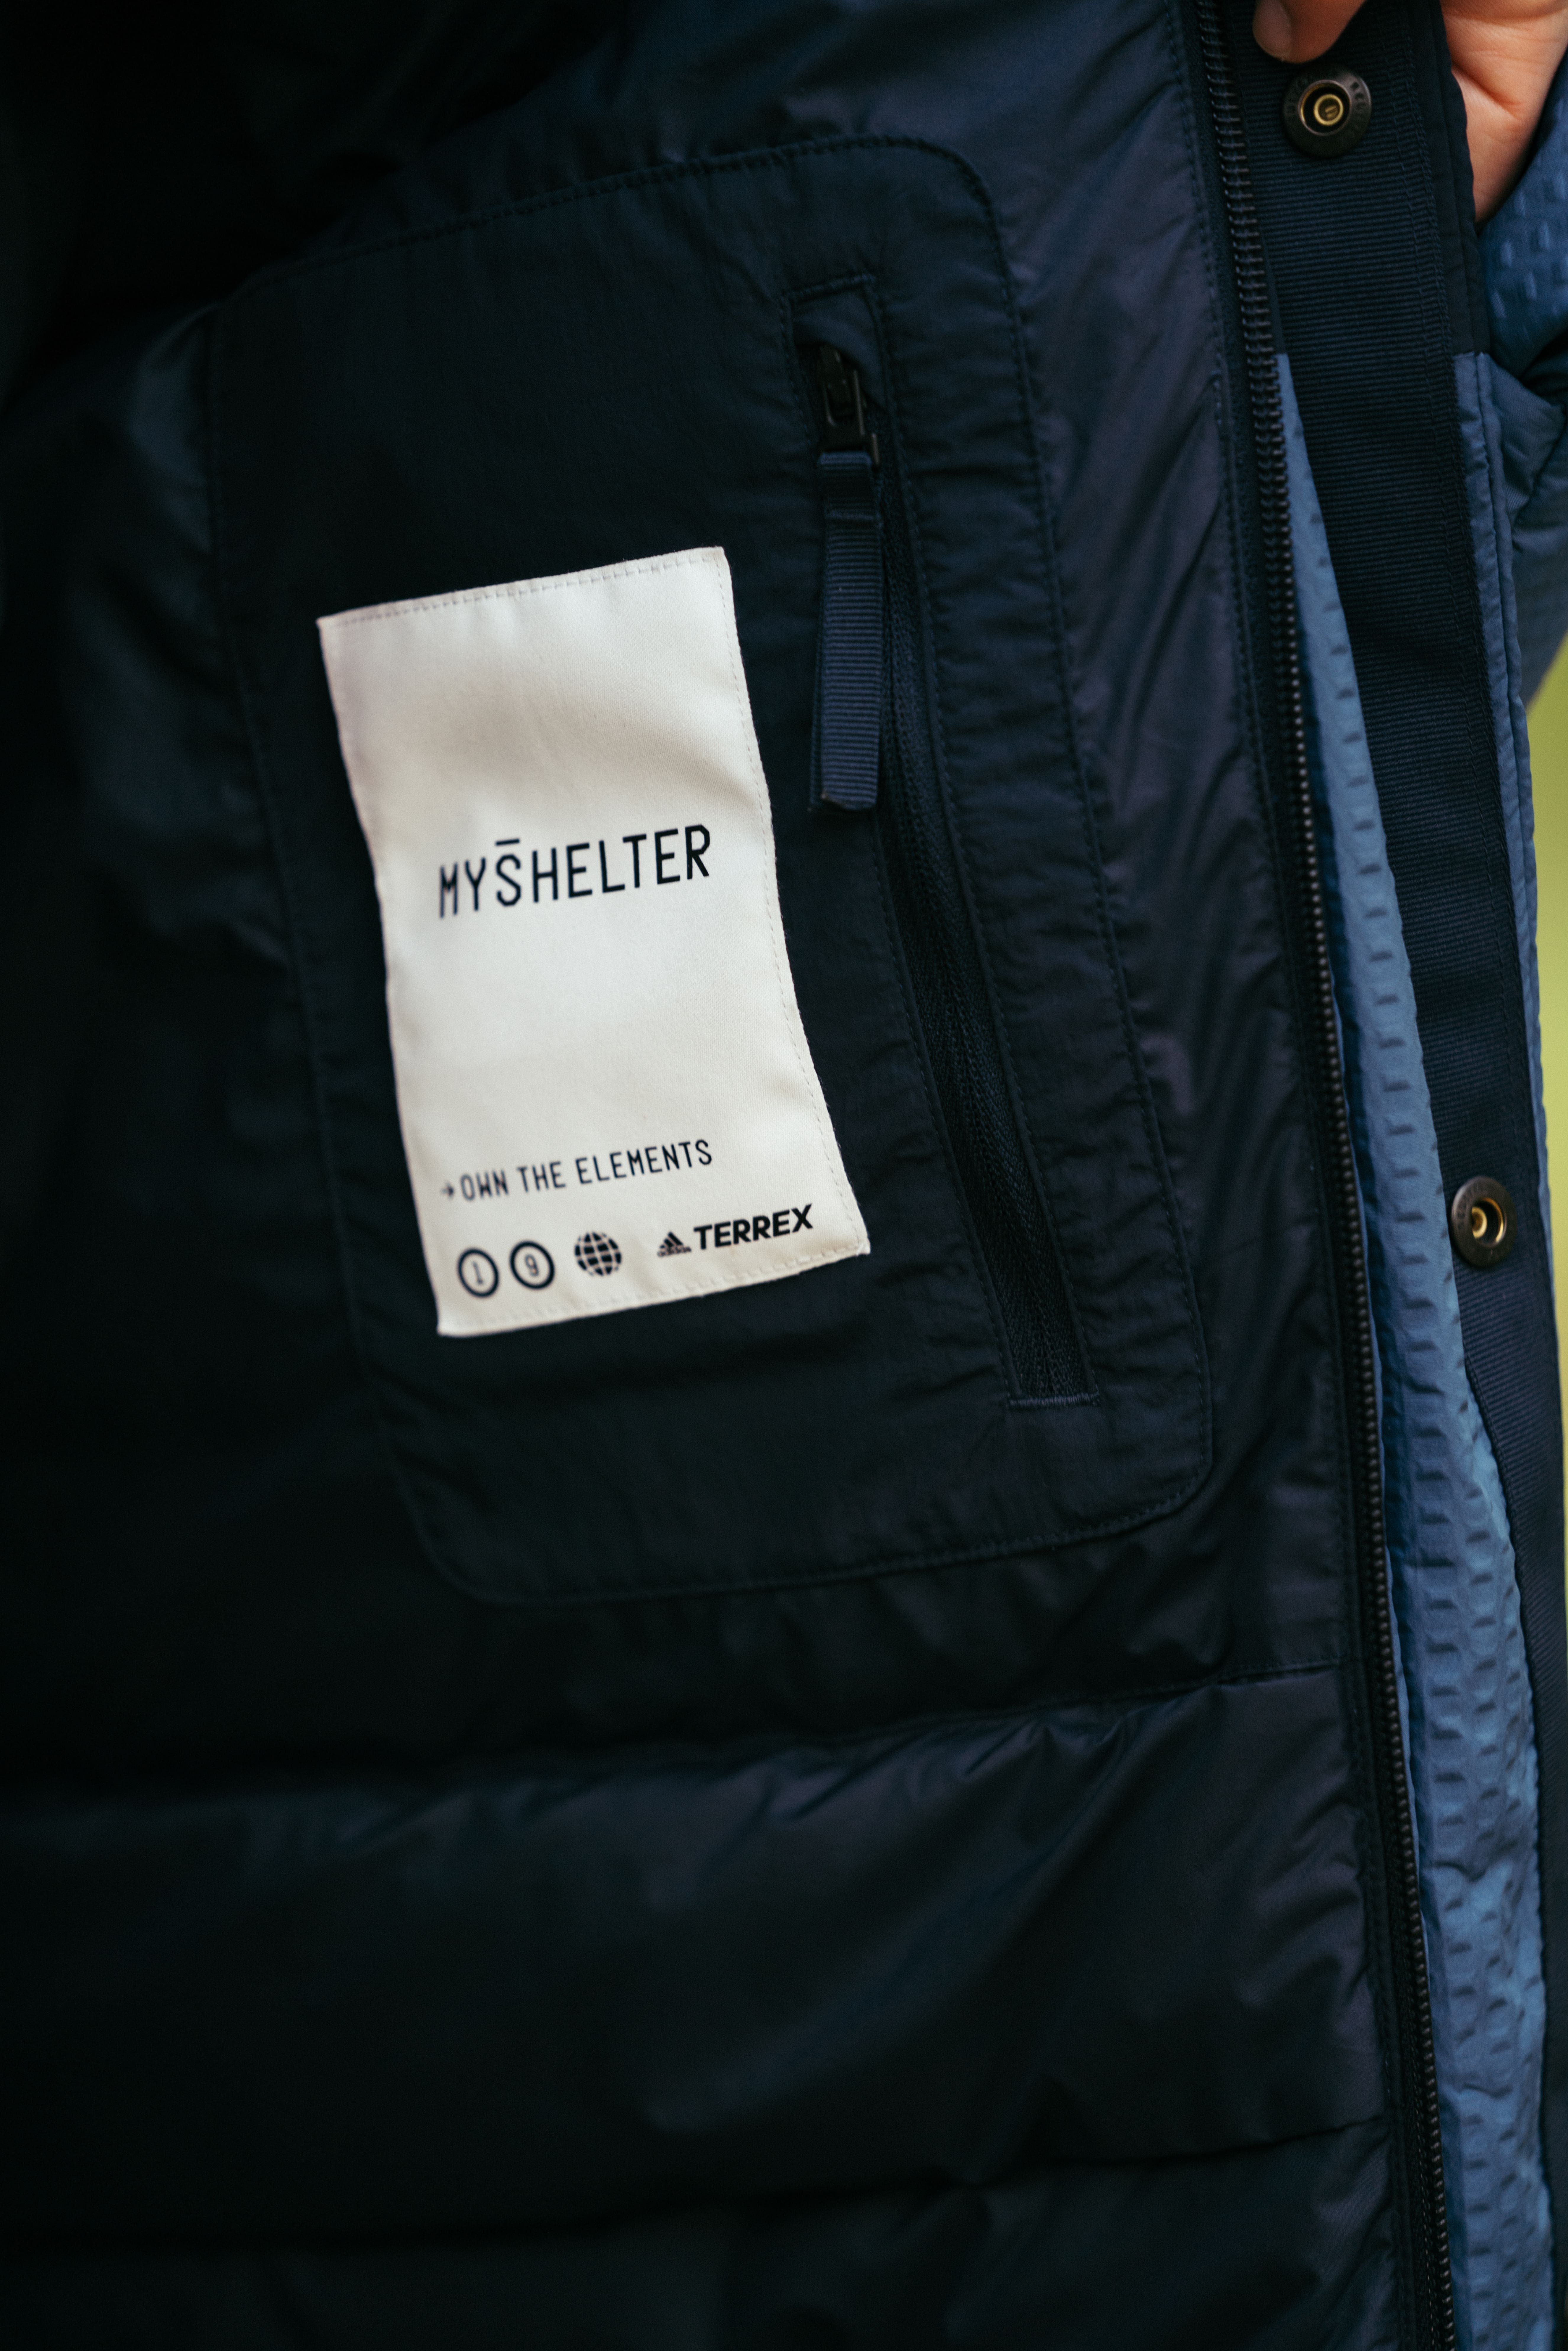 City ISPO of Jacket 2022: Adidas Nominee COLD.RDY Award the The MYSHELTER from